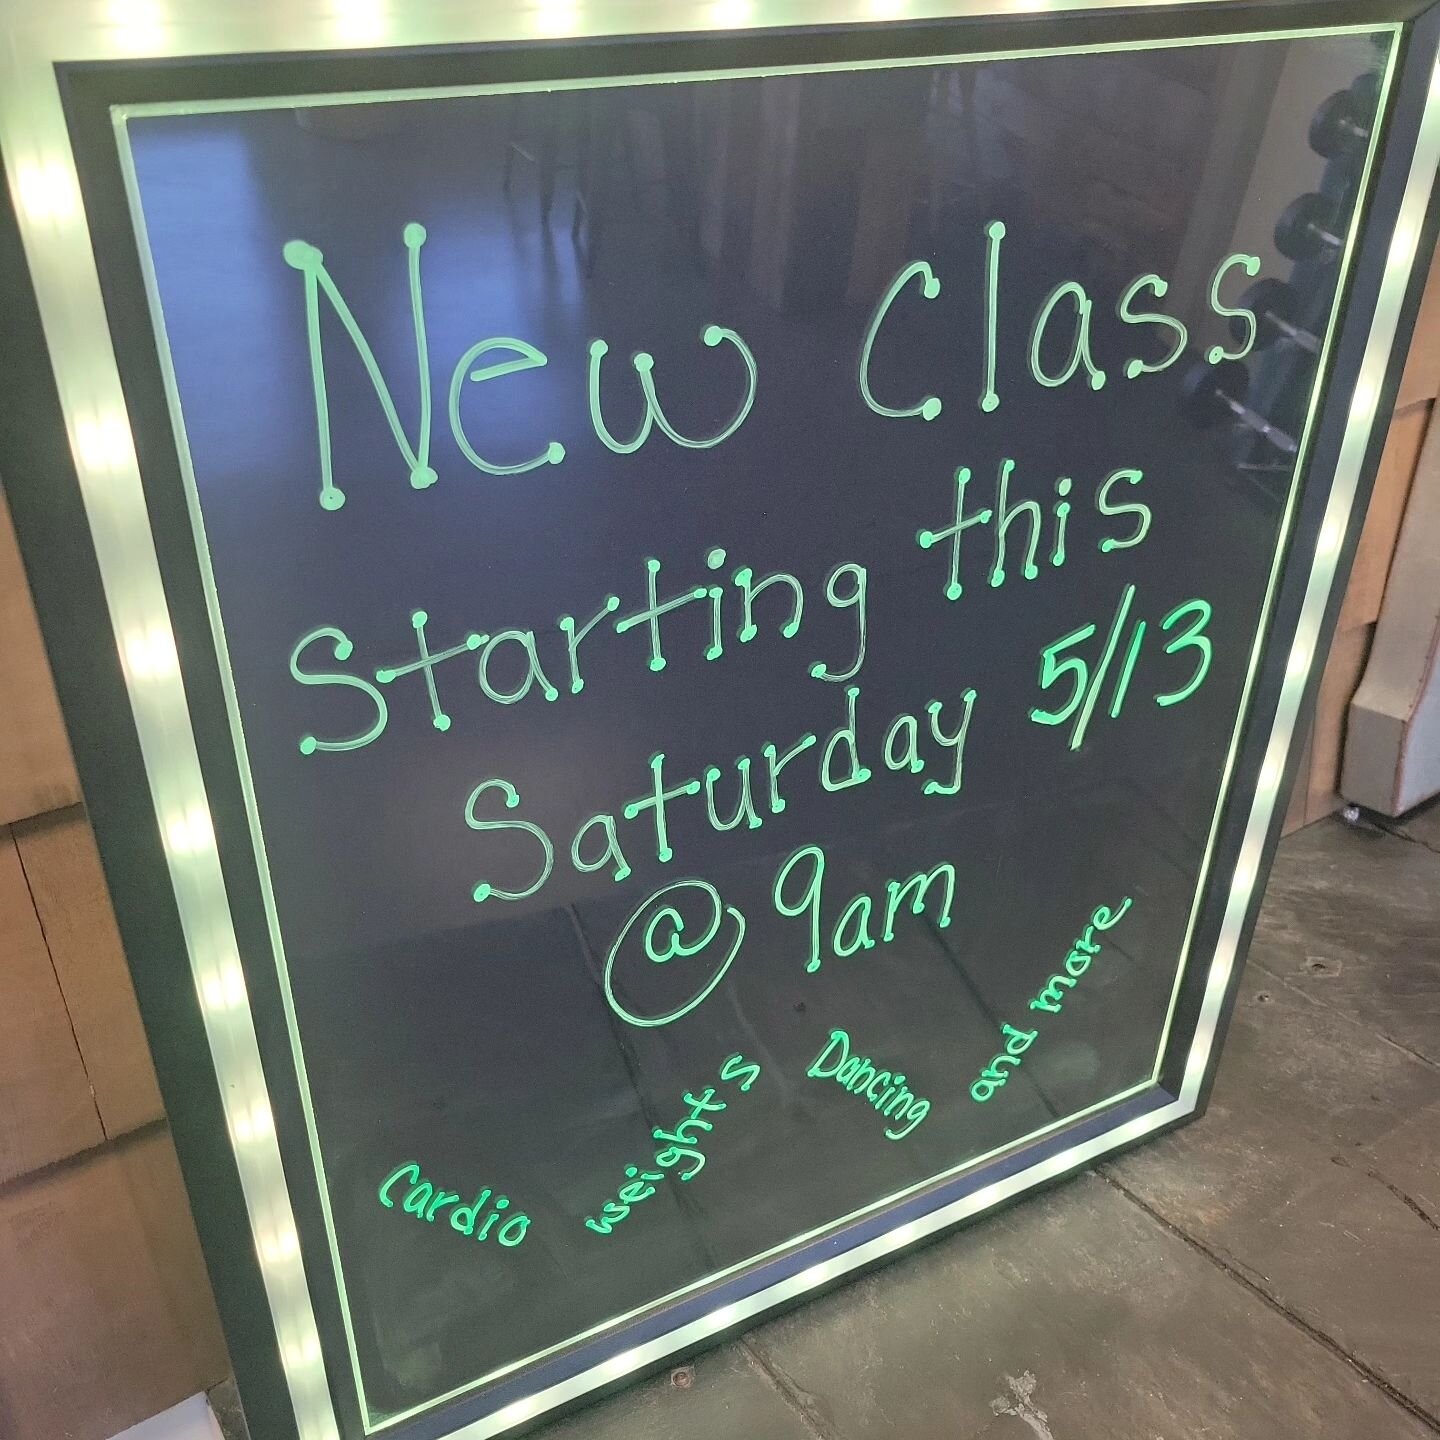 Join us this Saturday for the kickoff of our new class! Cardio, weights, kickboxing,  dancing and so much more.

Saturdays 9am
Monday and Wednesday's at 530pm